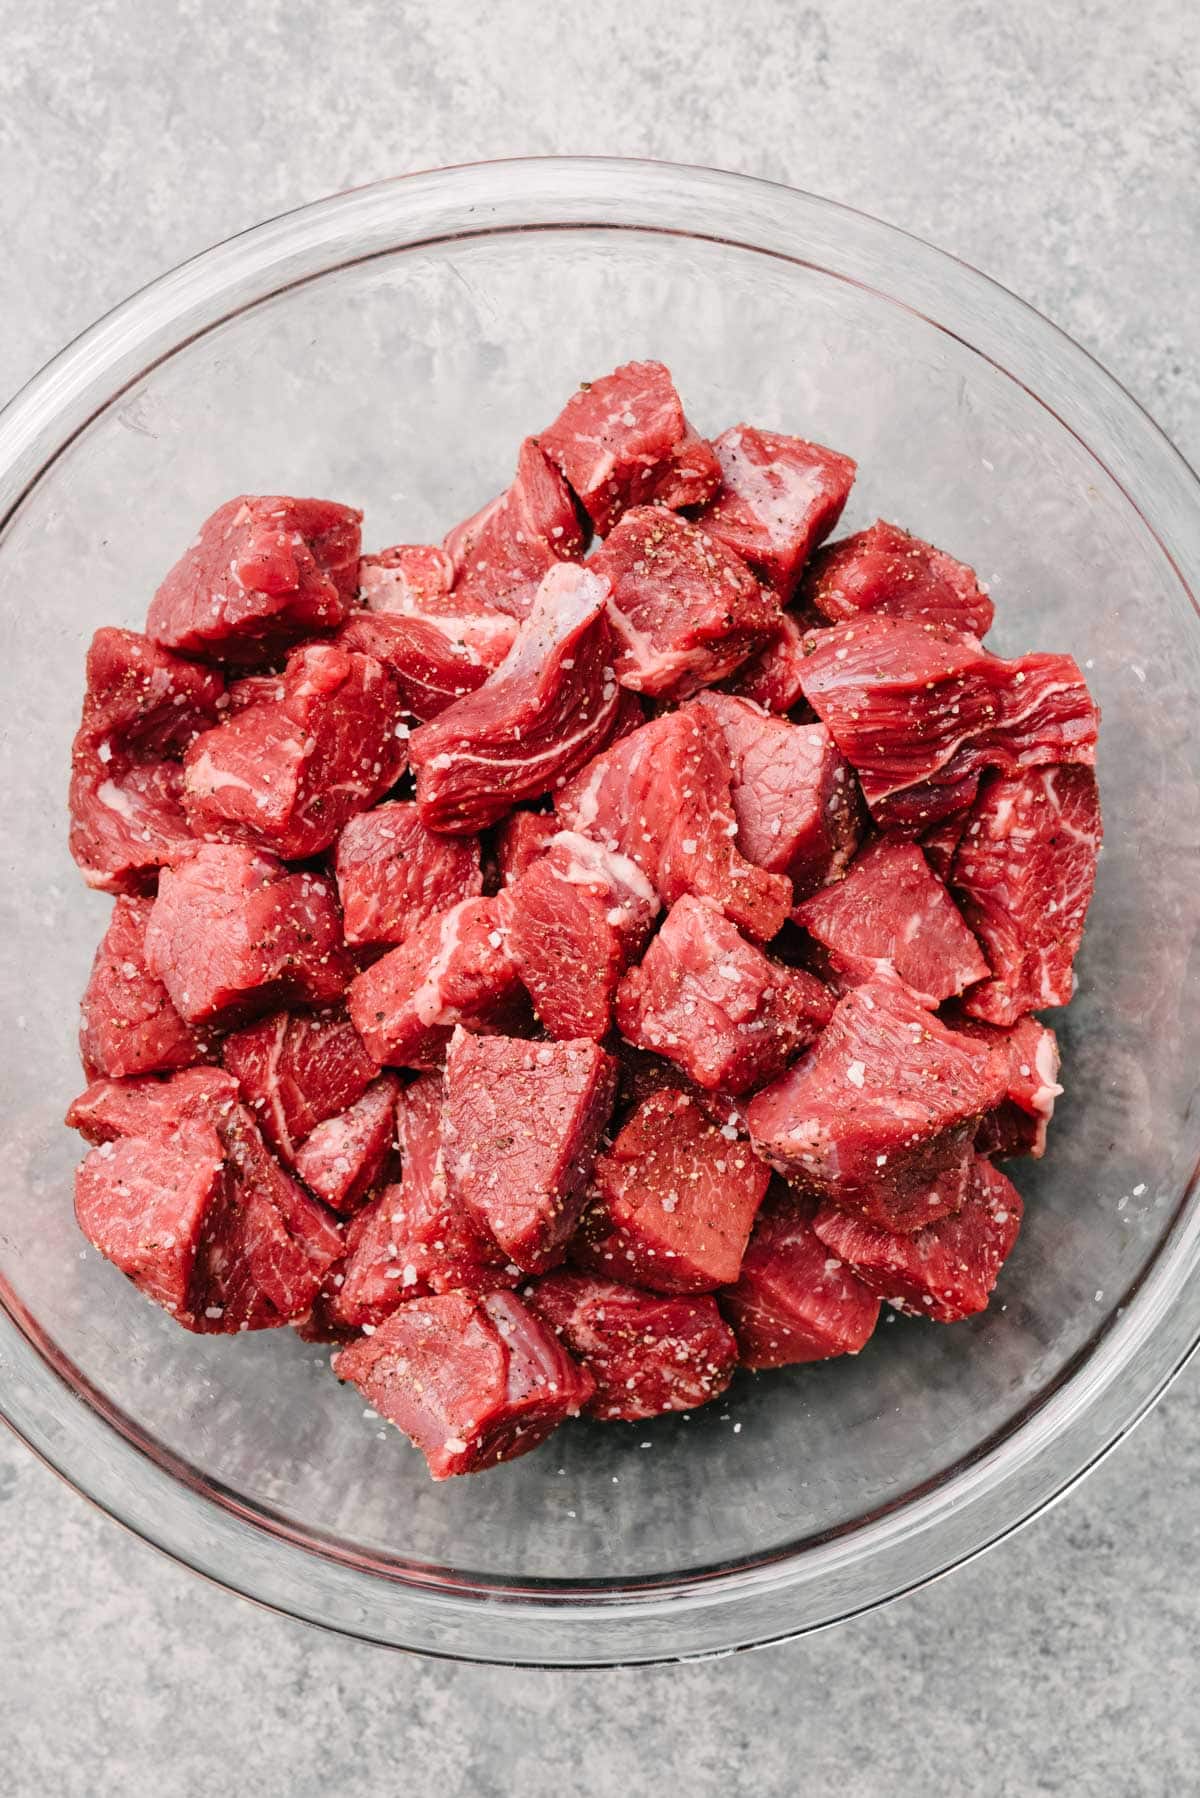 Raw stew meat seasoned with salt and pepper in a large mixing bowl.